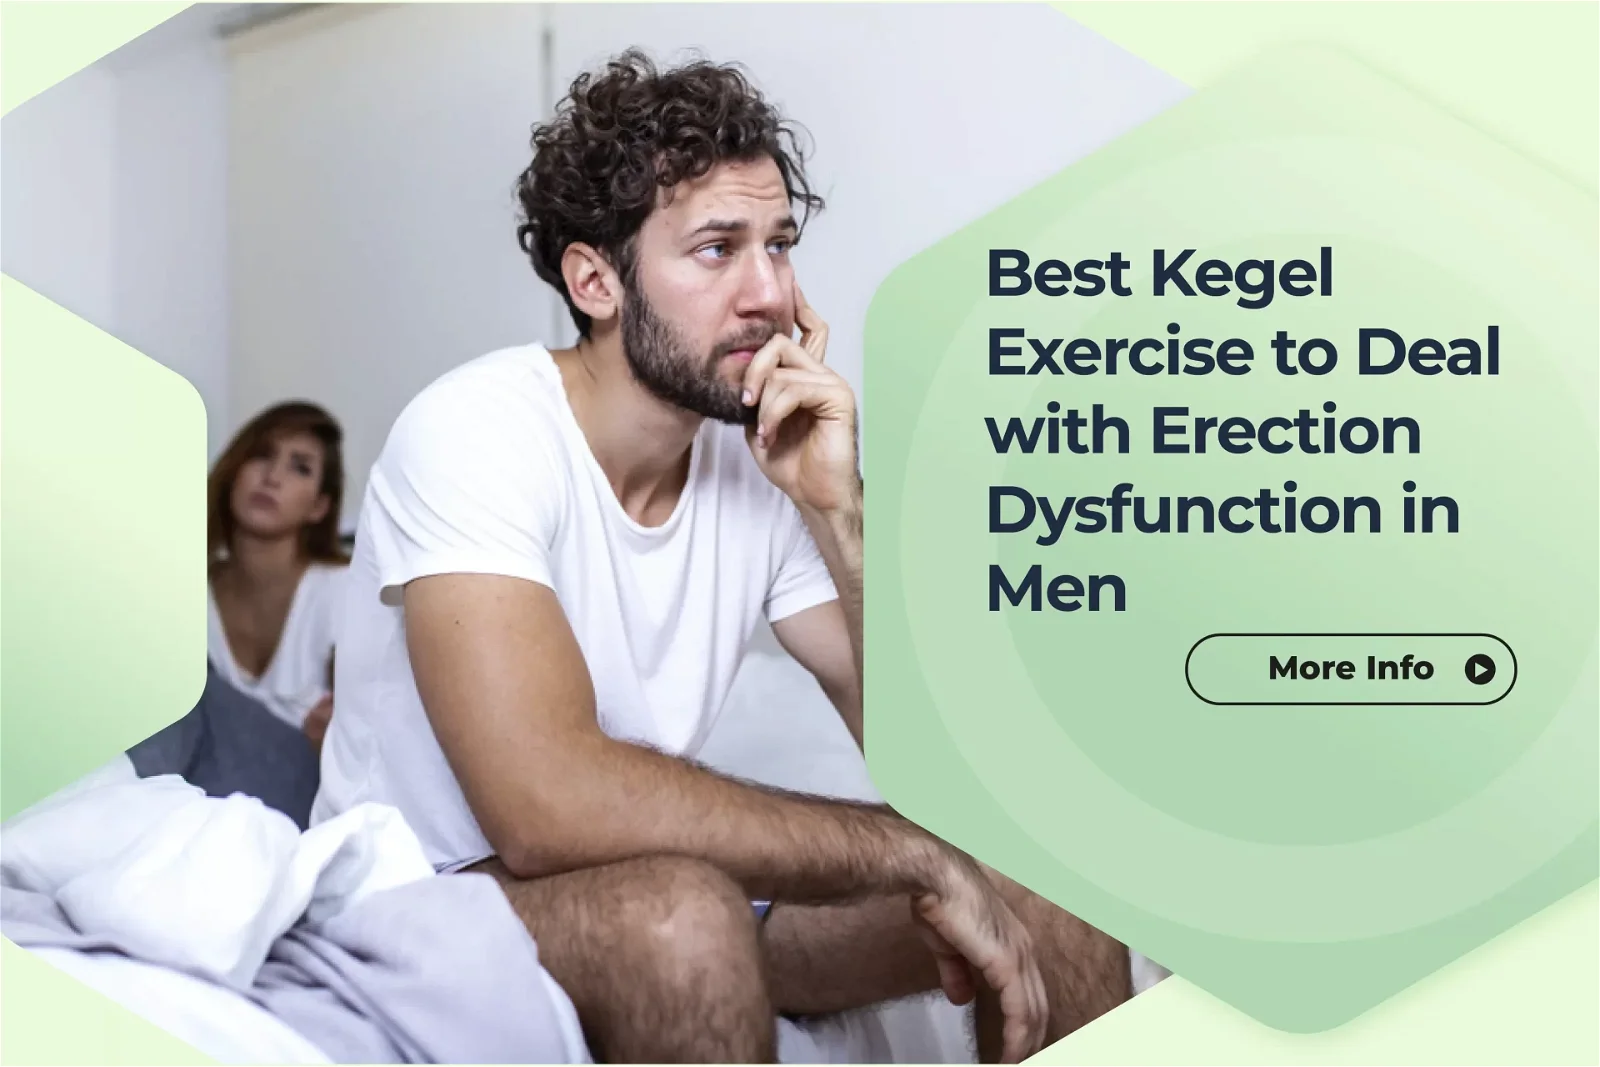 Best Kegel Exercise to Deal with Erection Dysfunction in Men